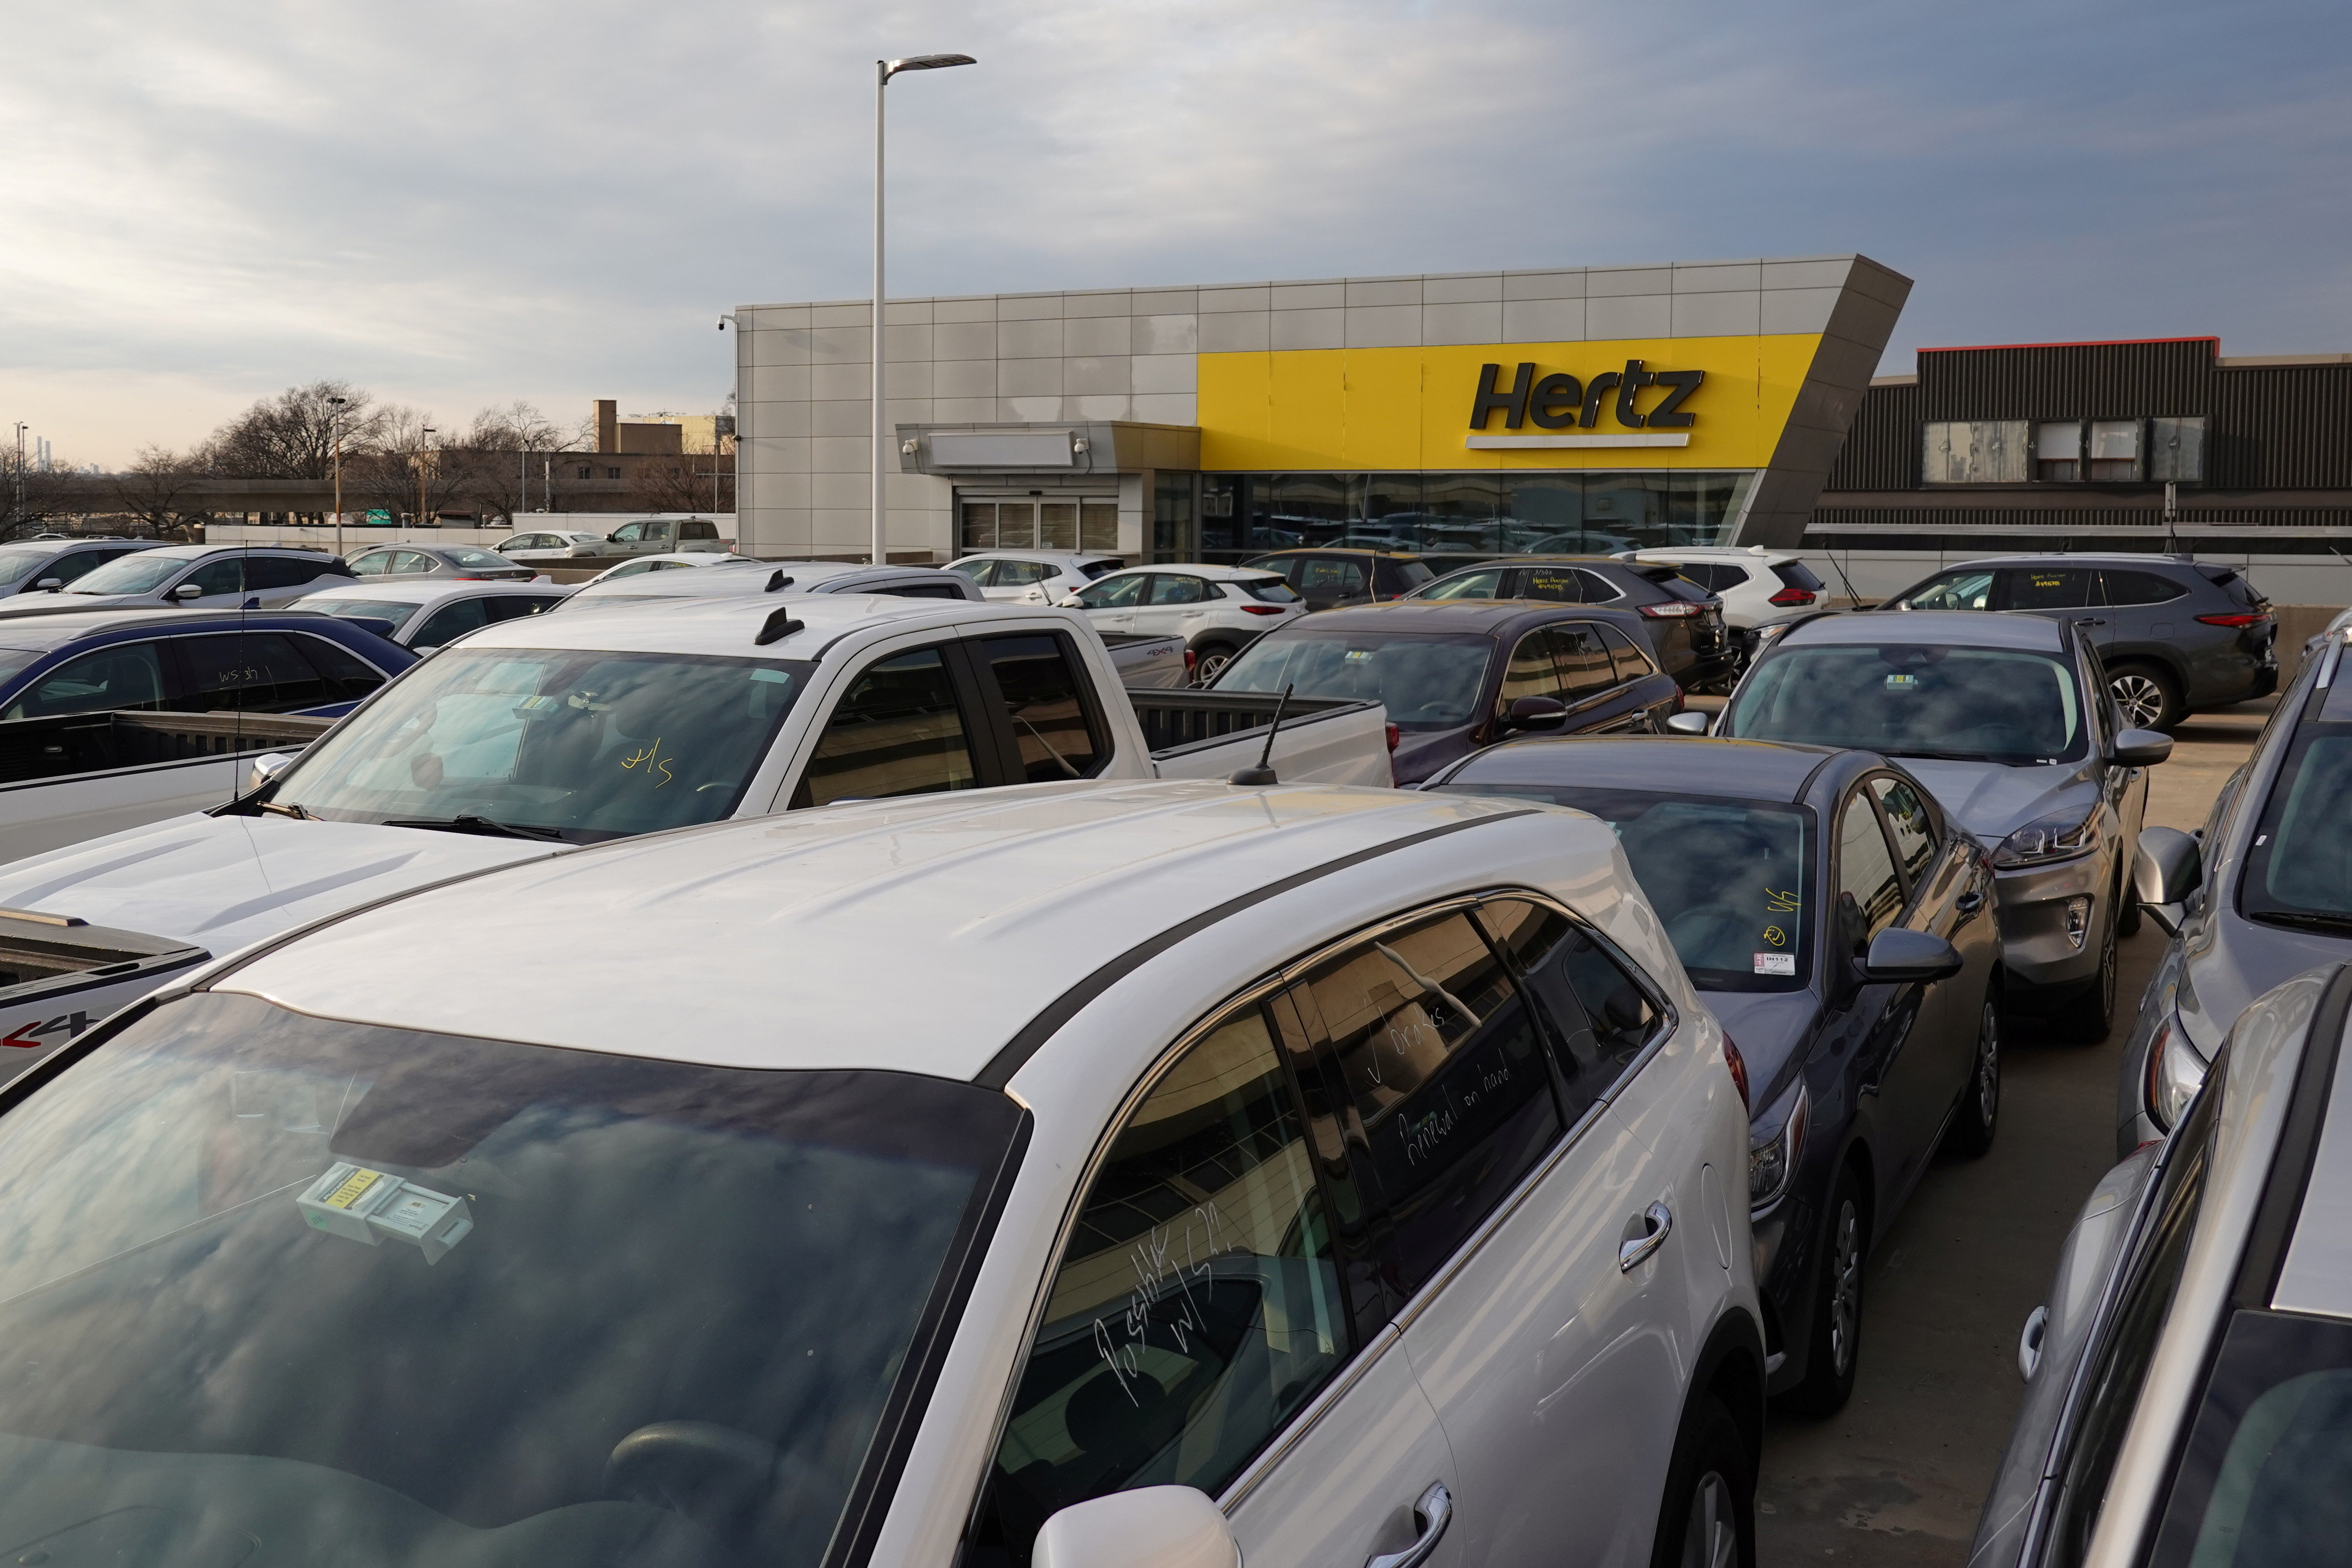 Cars are parked near Hertz car rental signage at John F. Kennedy International Airport in Queens, New York City